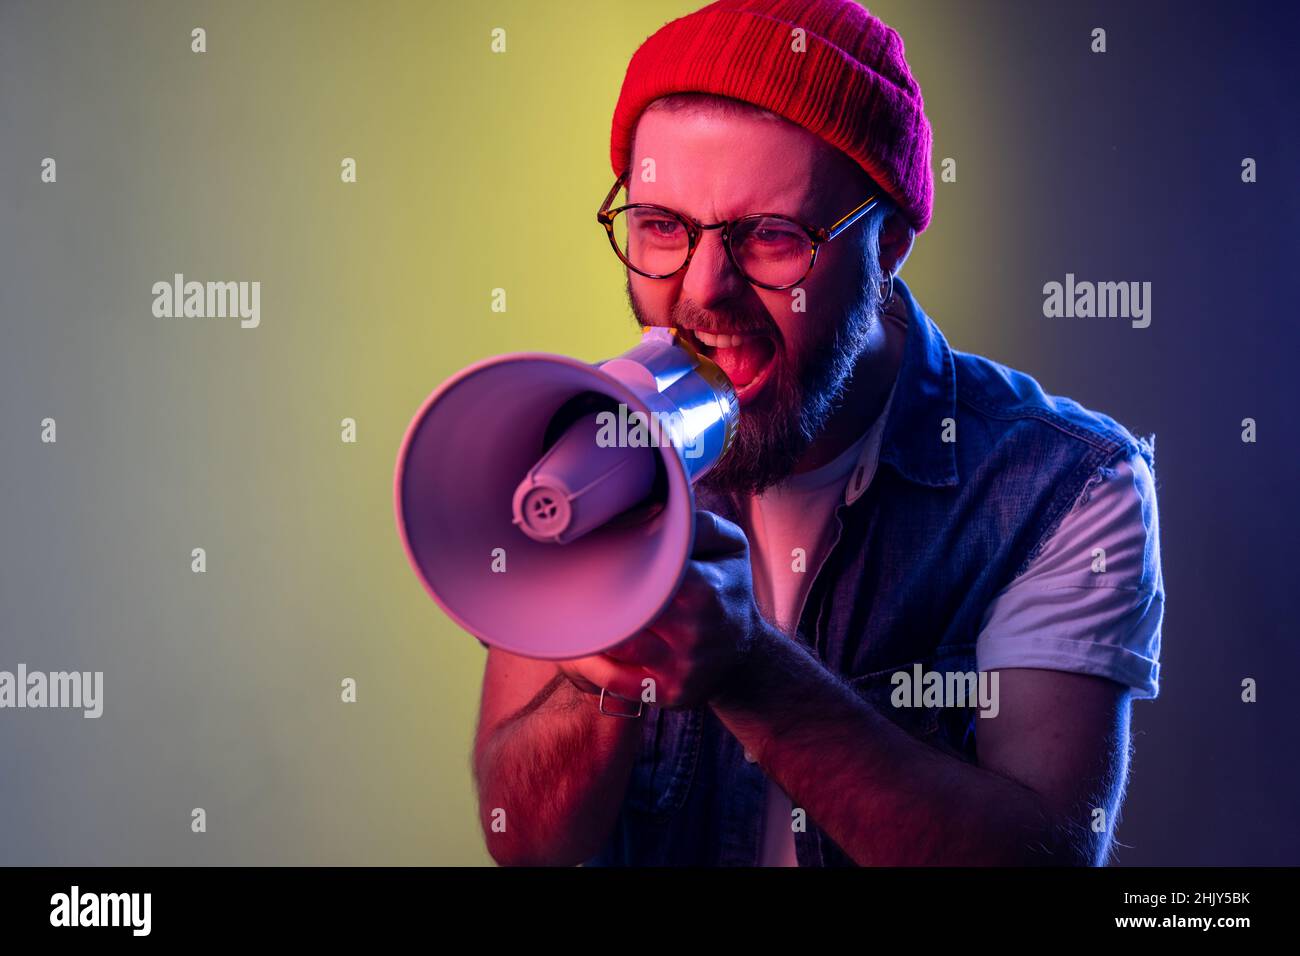 Excited hipster guy screaming loud using megaphone, making announcement, presentation, protesting, wearing beanie hat and denim vest. Indoor studio shot isolated on colorful neon light background. Stock Photo